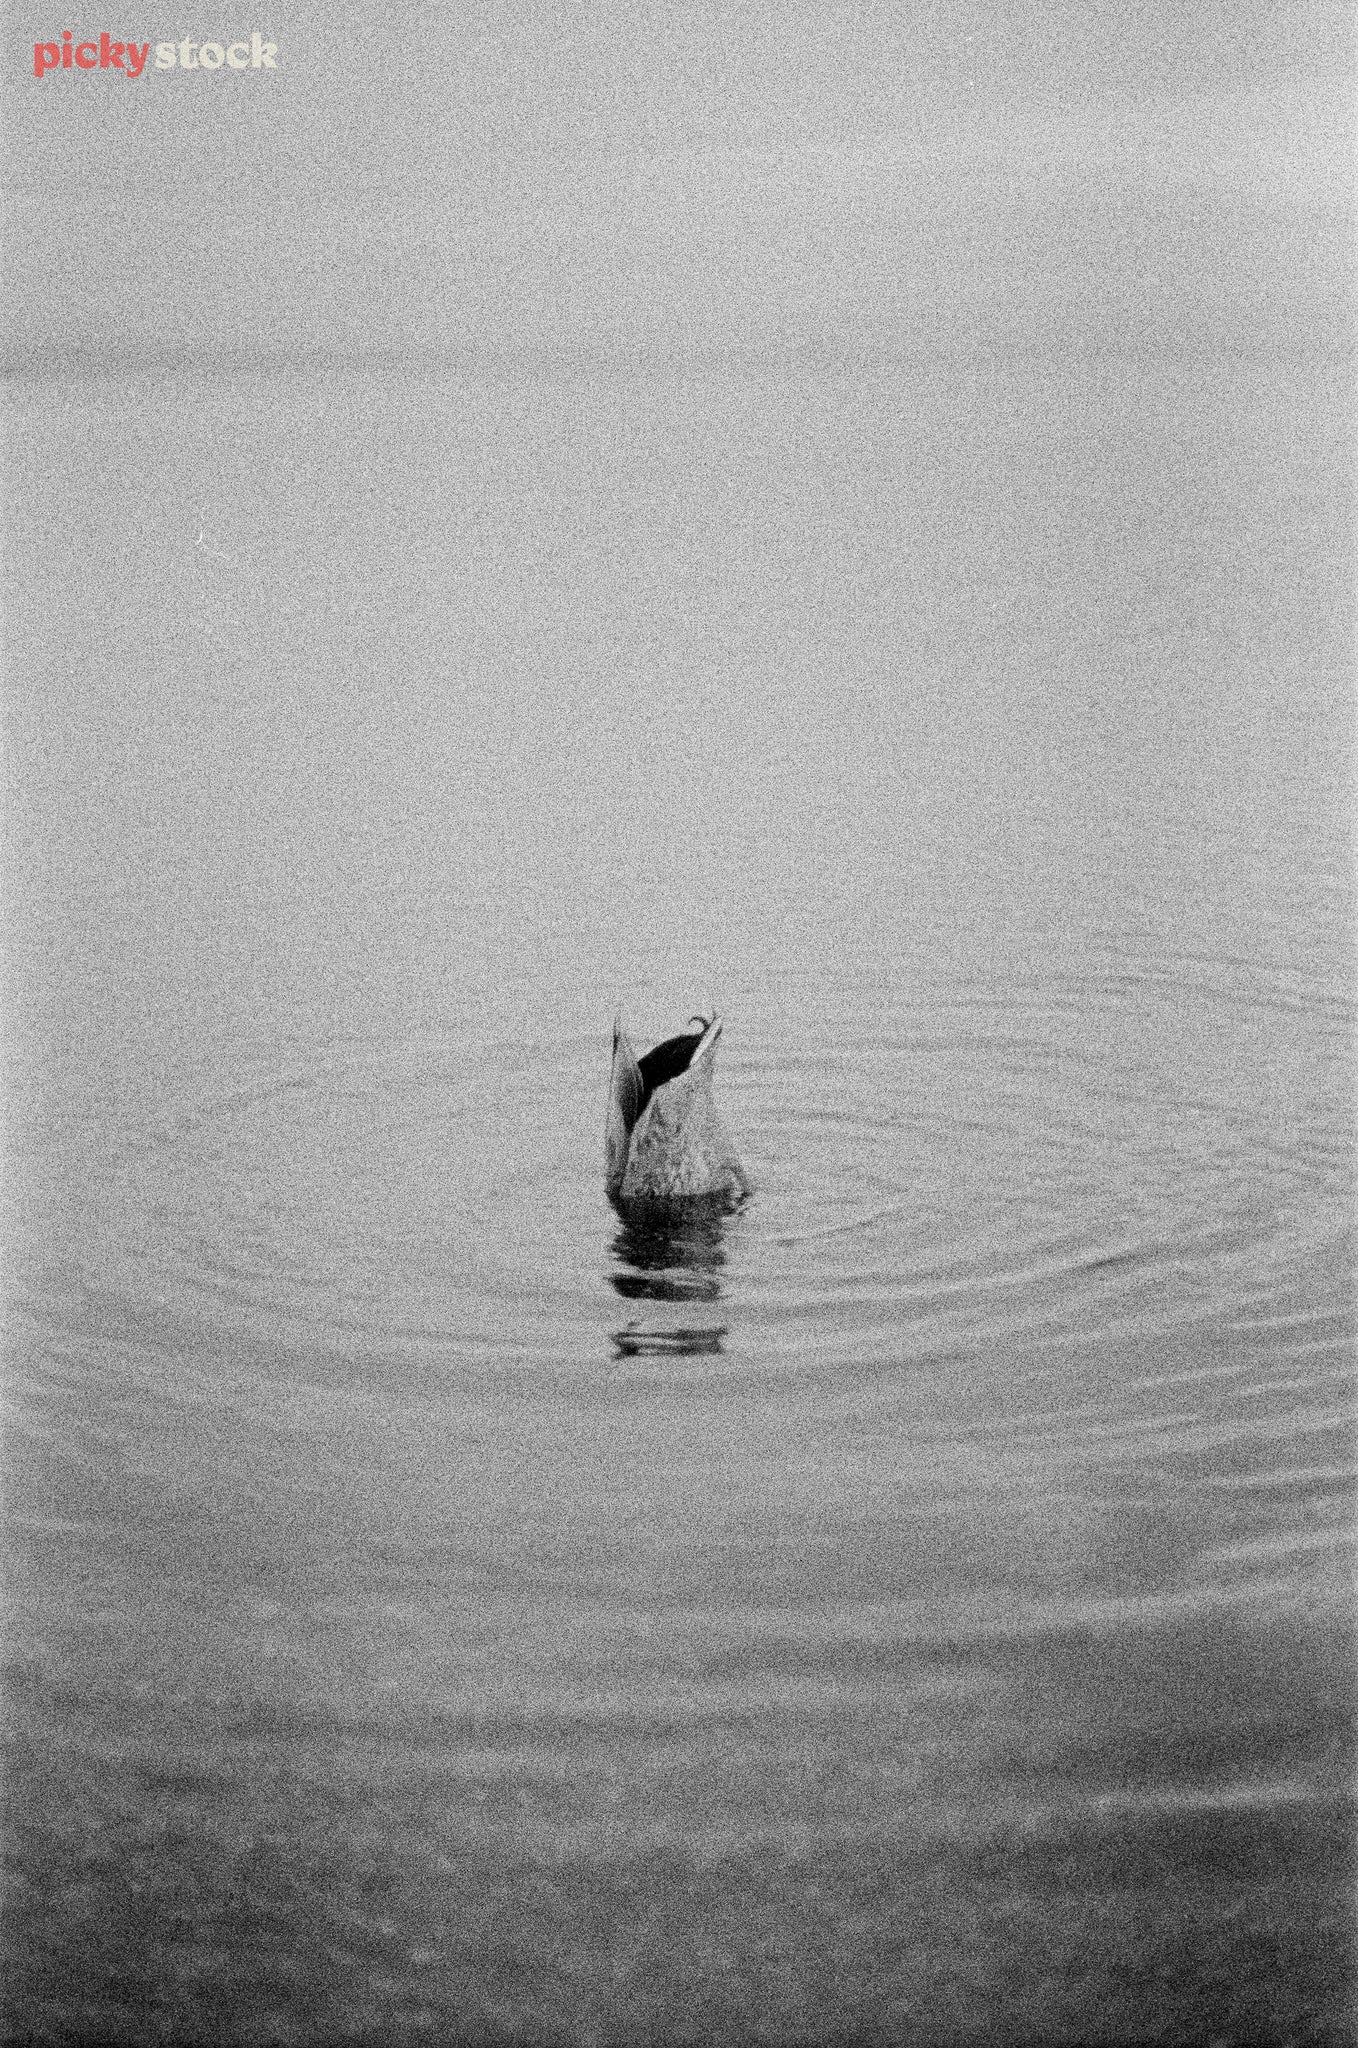 Portrait black and white image of duck diving for food. Ripples of water circling around duck